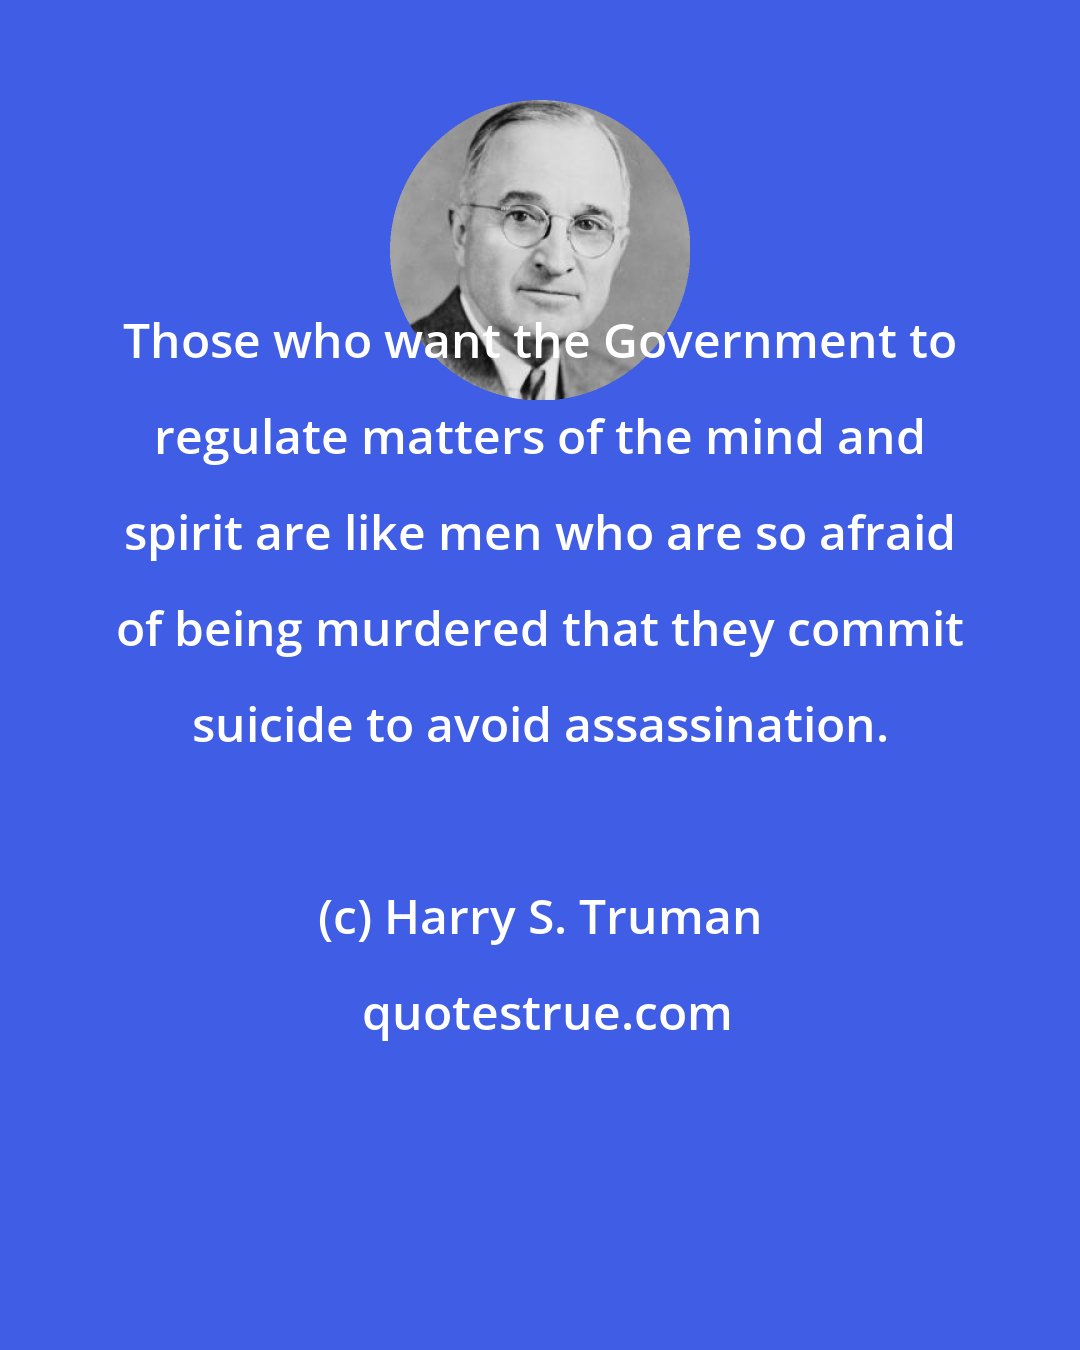 Harry S. Truman: Those who want the Government to regulate matters of the mind and spirit are like men who are so afraid of being murdered that they commit suicide to avoid assassination.